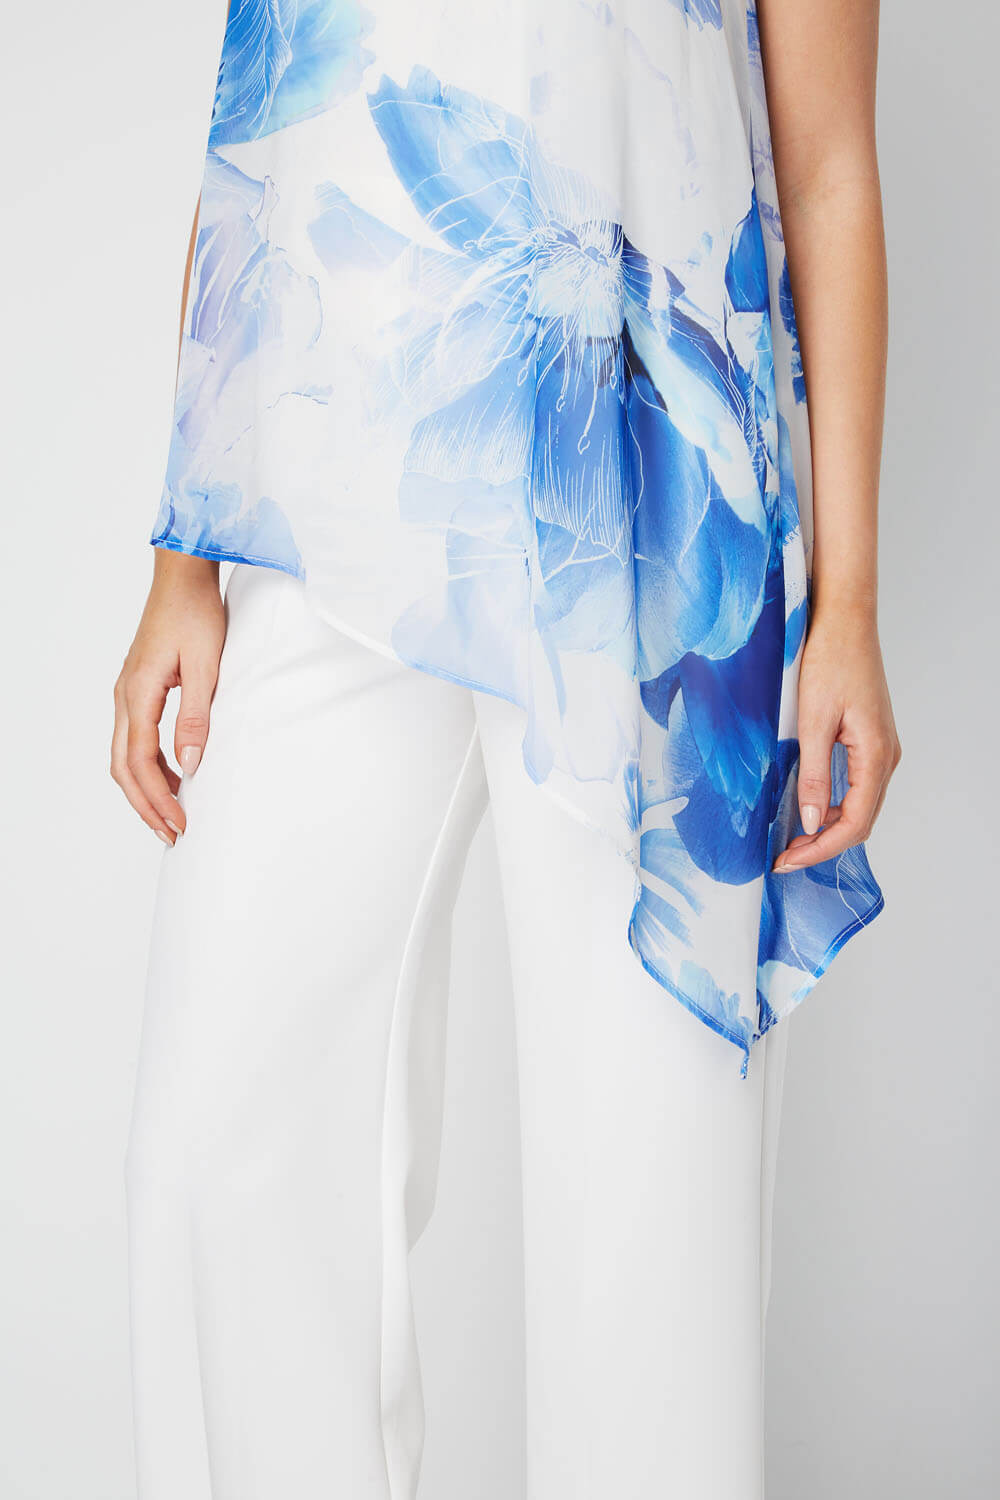 Royal Blue Floral Chiffon Overlay Jumpsuit, Image 3 of 4